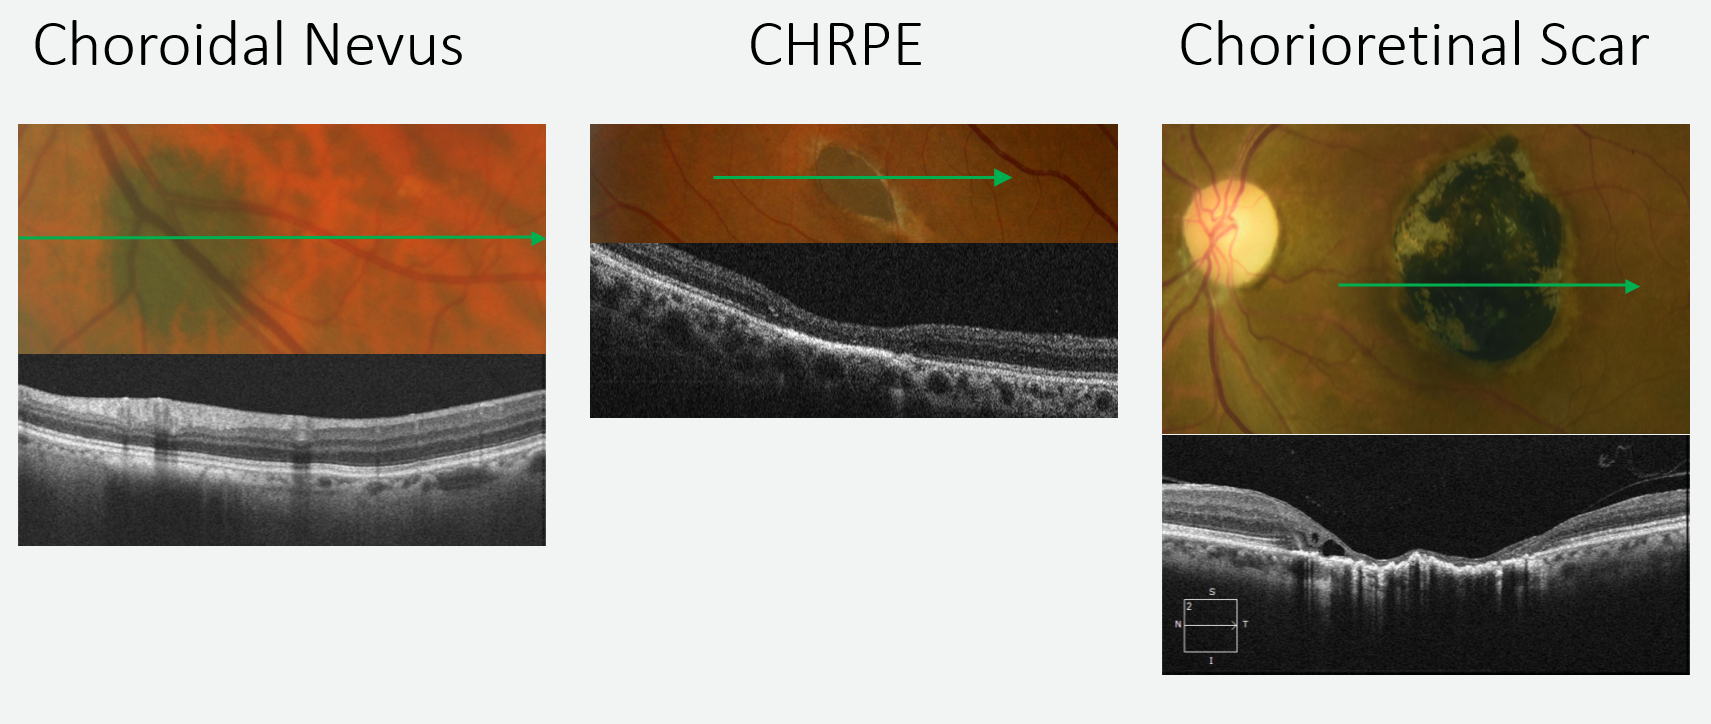 On the left choroidal thinning can be seen anterior to a flat nevus both of which are posterior to the RPE. The middle image shows outer retinal thinning with an underlying thickened RPE representing  a CHRPE.  In the image on the right a chorioretinal scar has caused significant inner and outer retinal atrophy and a distorted RPE